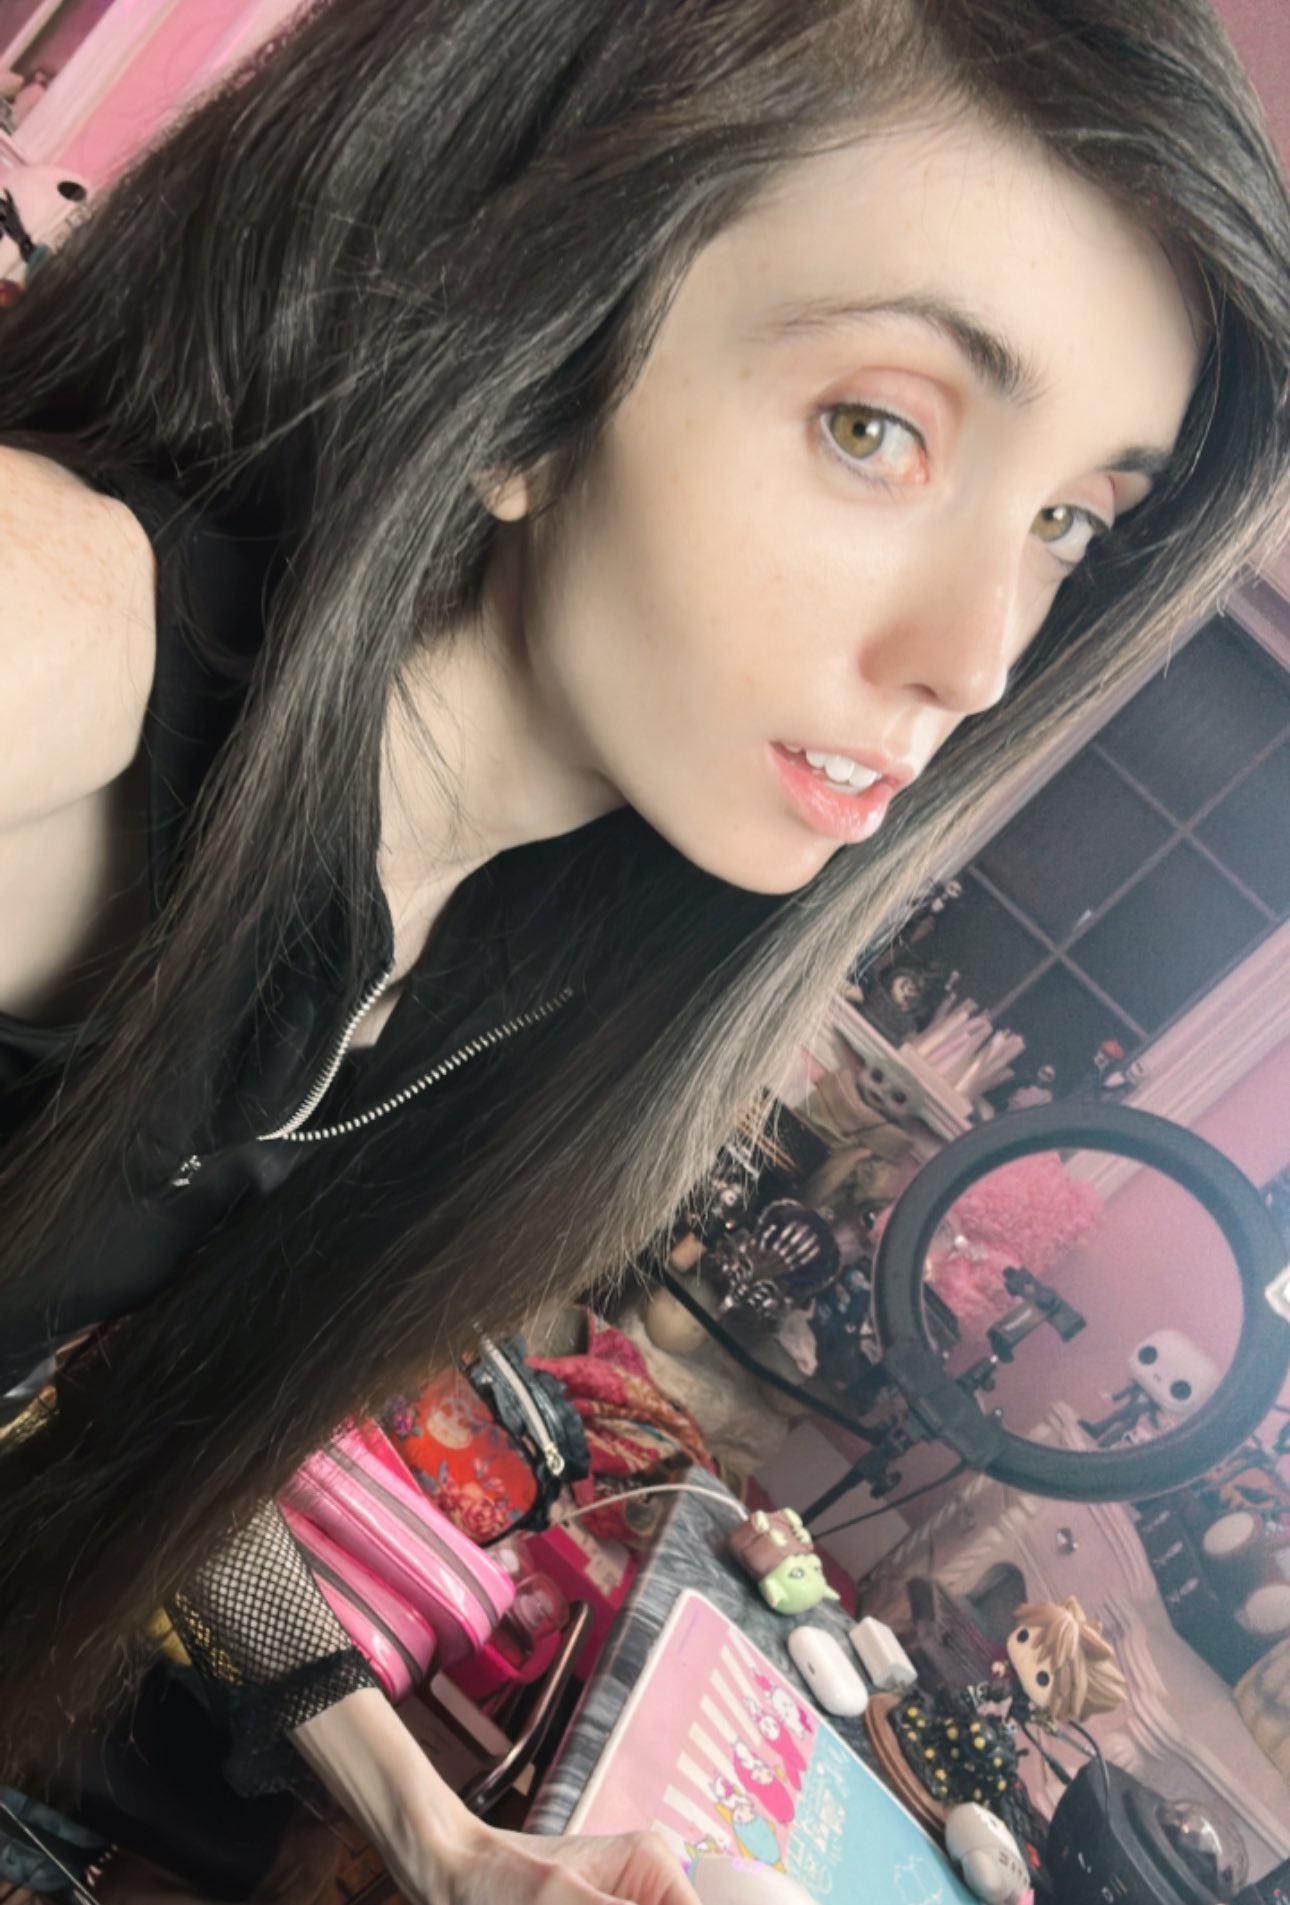 Eugenia Cooney on "no makeup / get ready with me stream I guess this means I have to stream with no makeup lol 🙊 come watch https://t.co/rtIfE0gyOr https://t.co/ENlIrgjngV" / Twitter